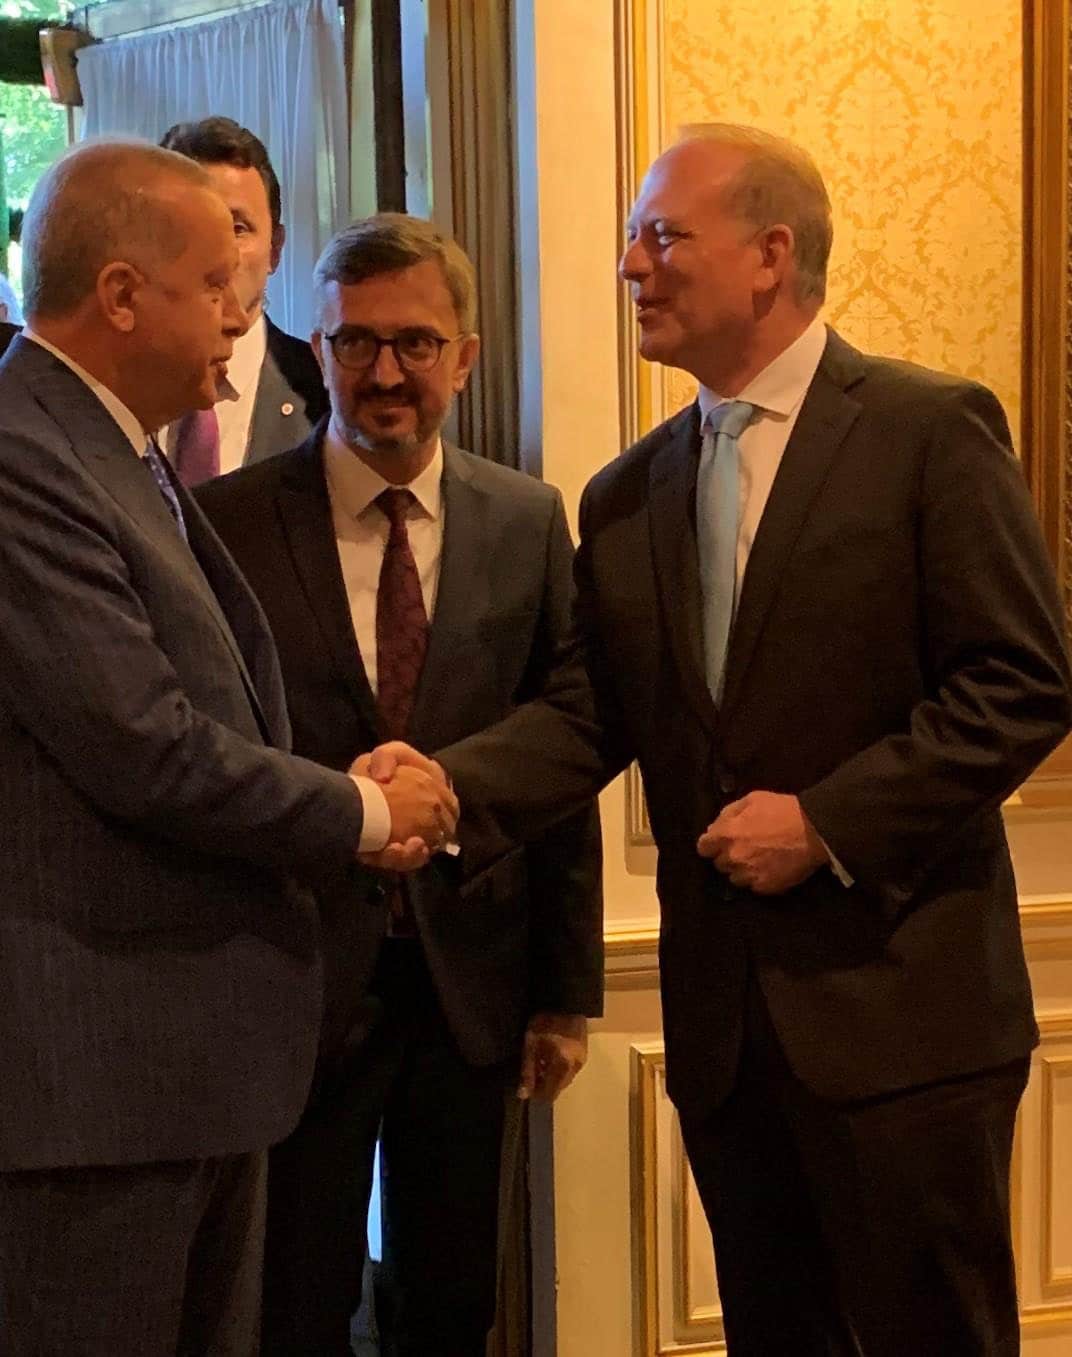 President Recep Erdogan meets with Dr. Parker in New York City for a private meeting following a roundtable discussion.